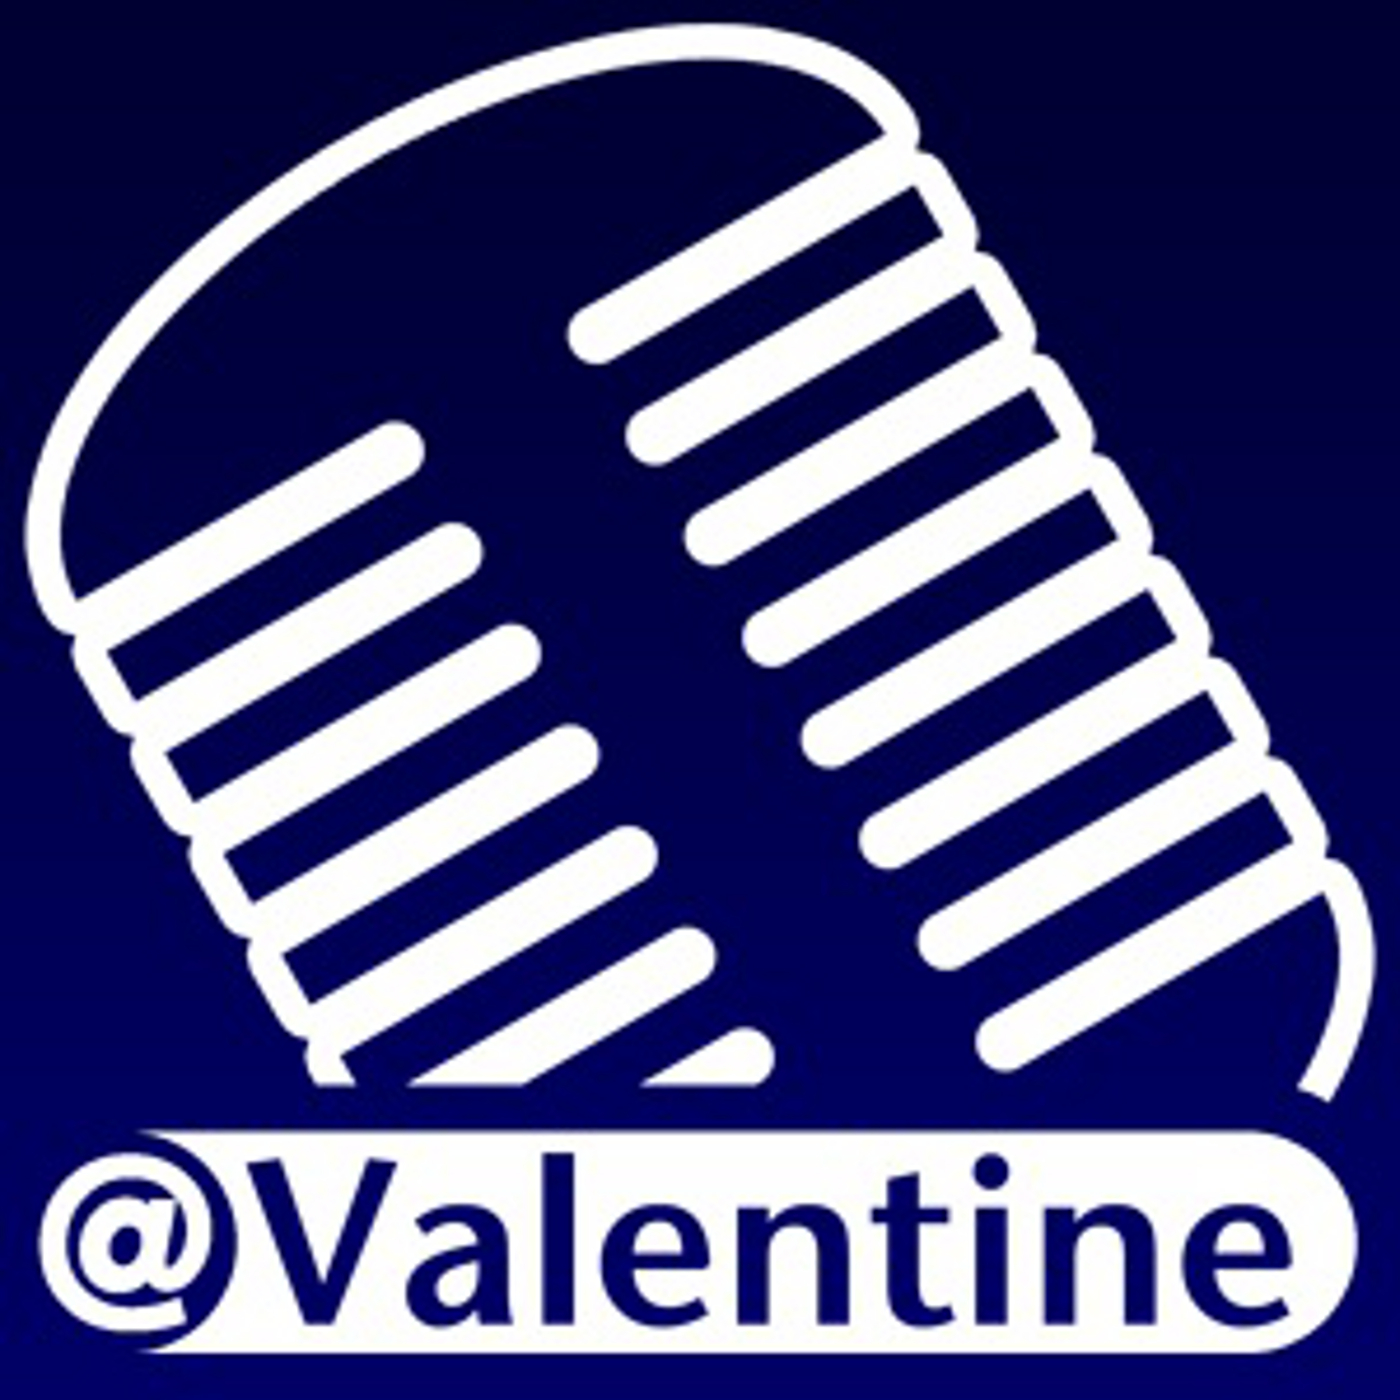 ValentineCast Episode #213 - We're Better Than 112